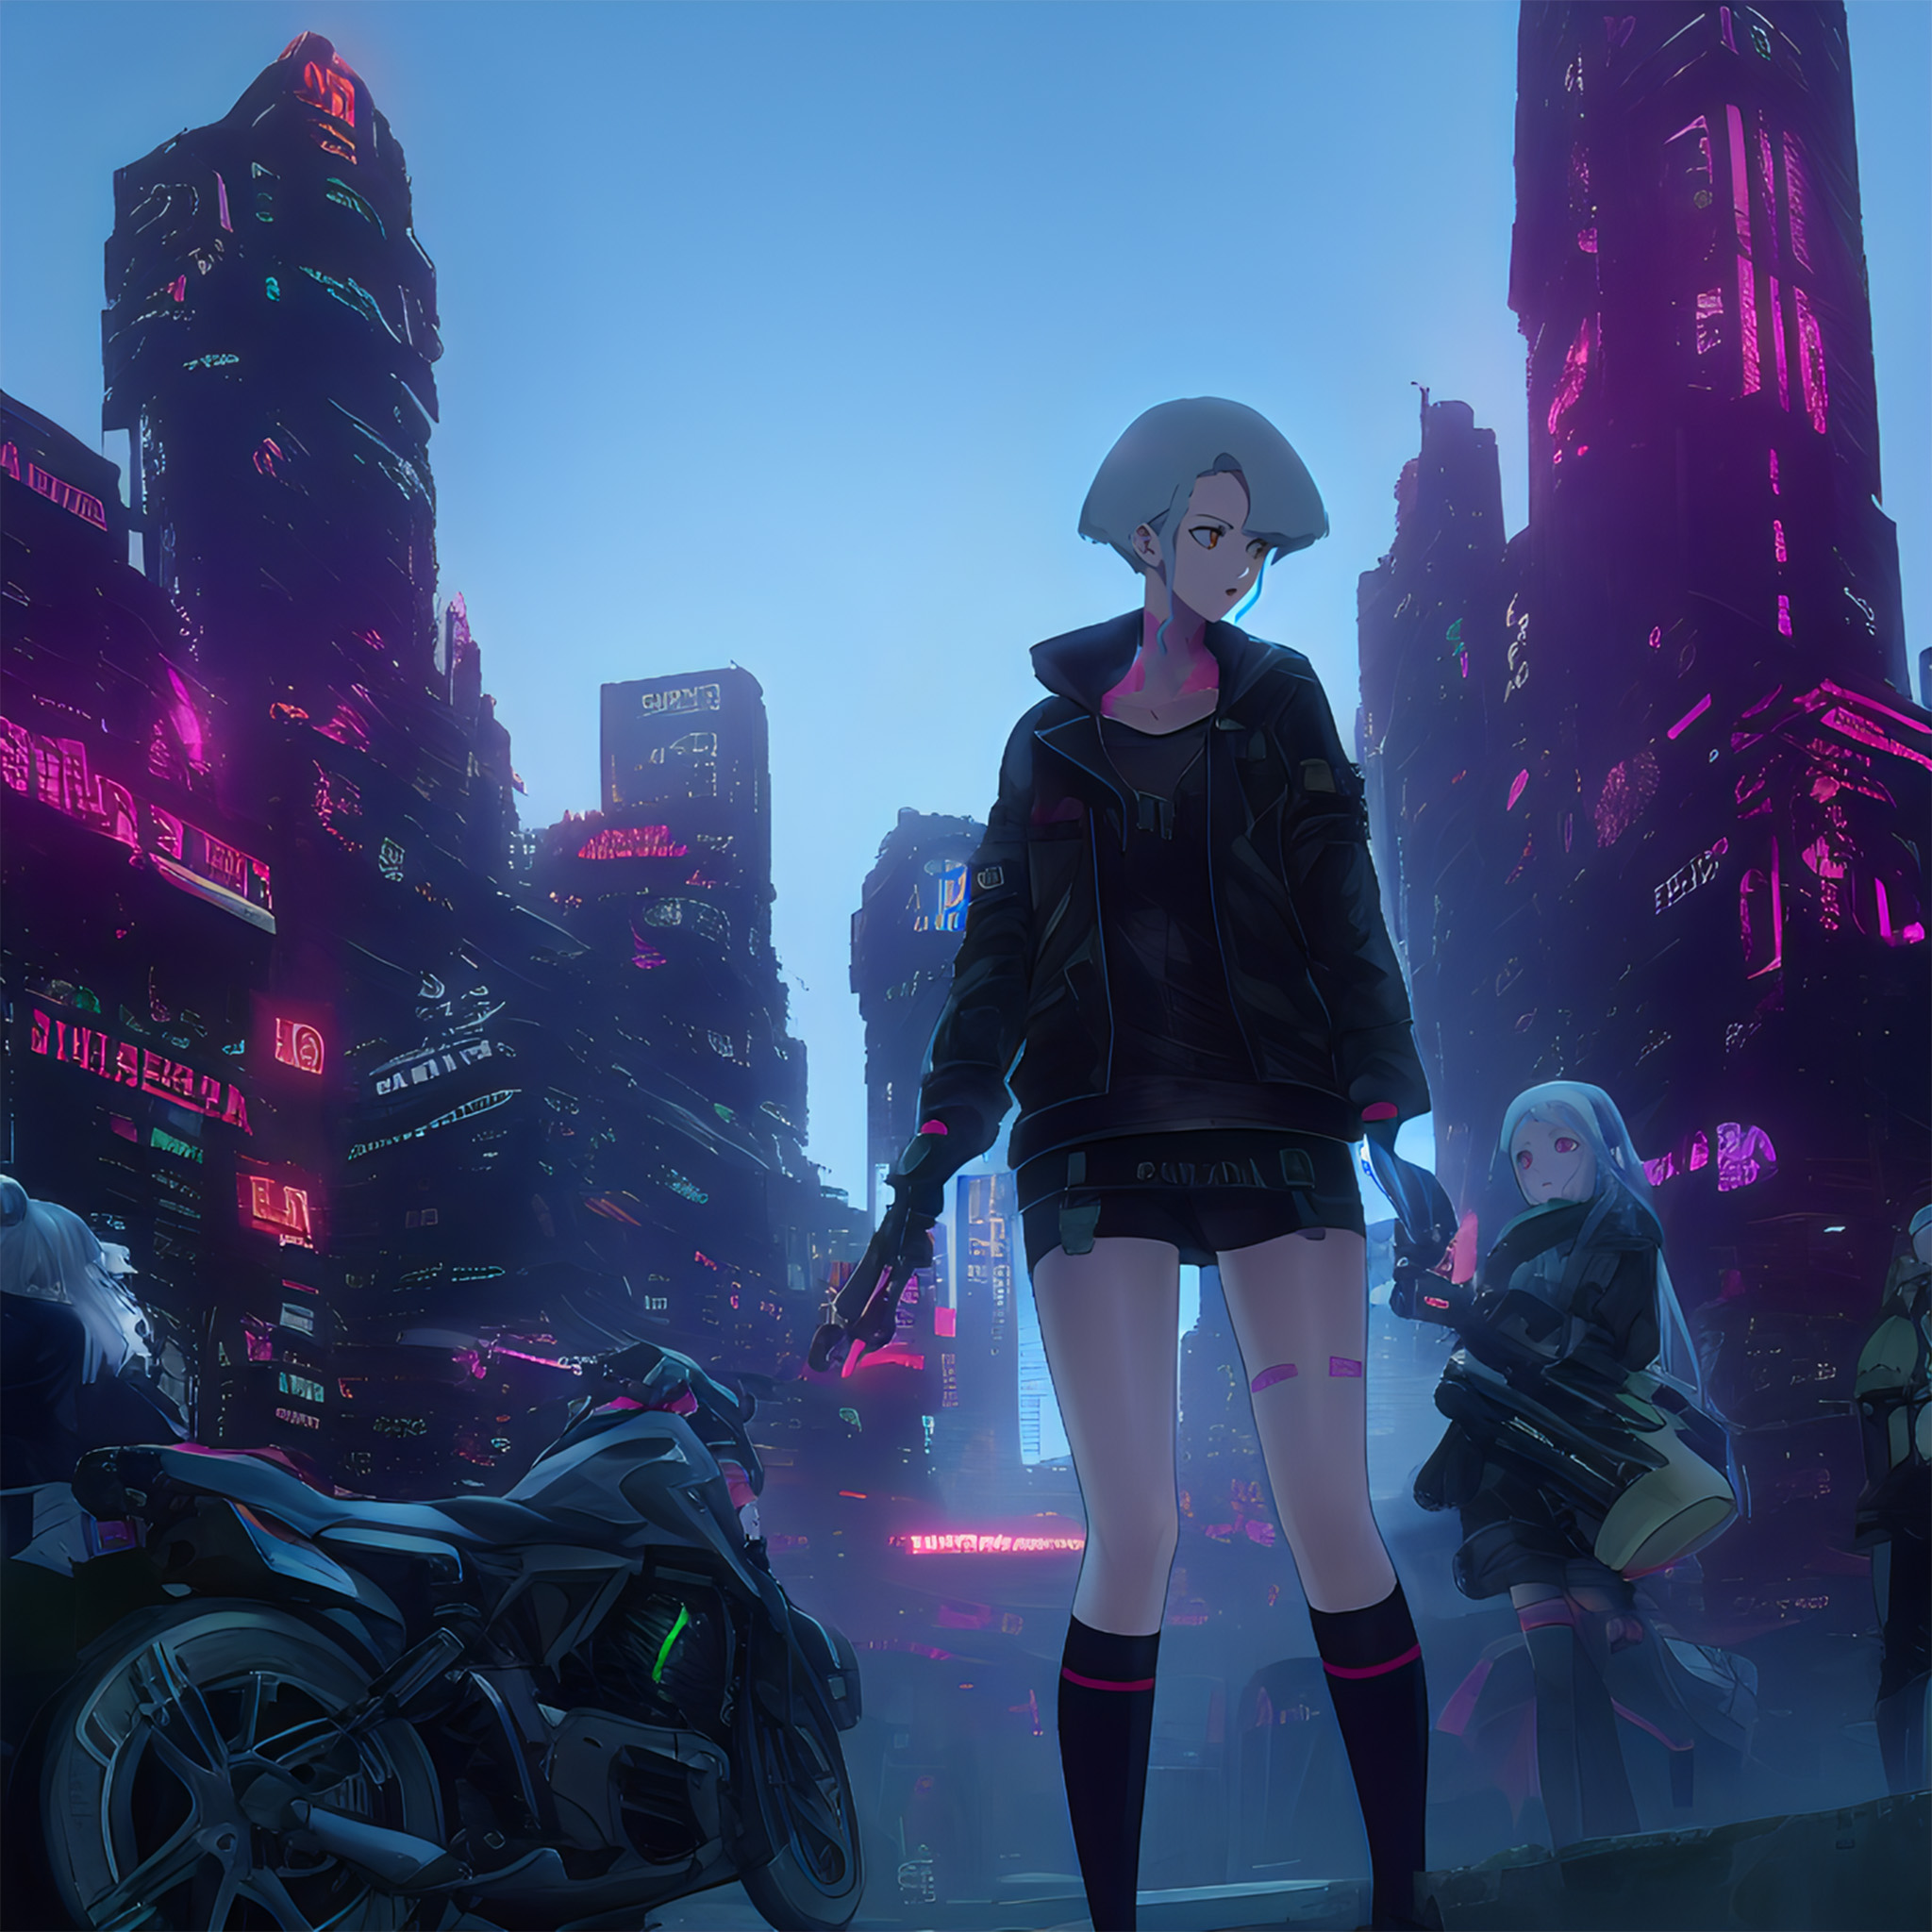 Cyberpunk City' Poster by Karl The Artist | Displate